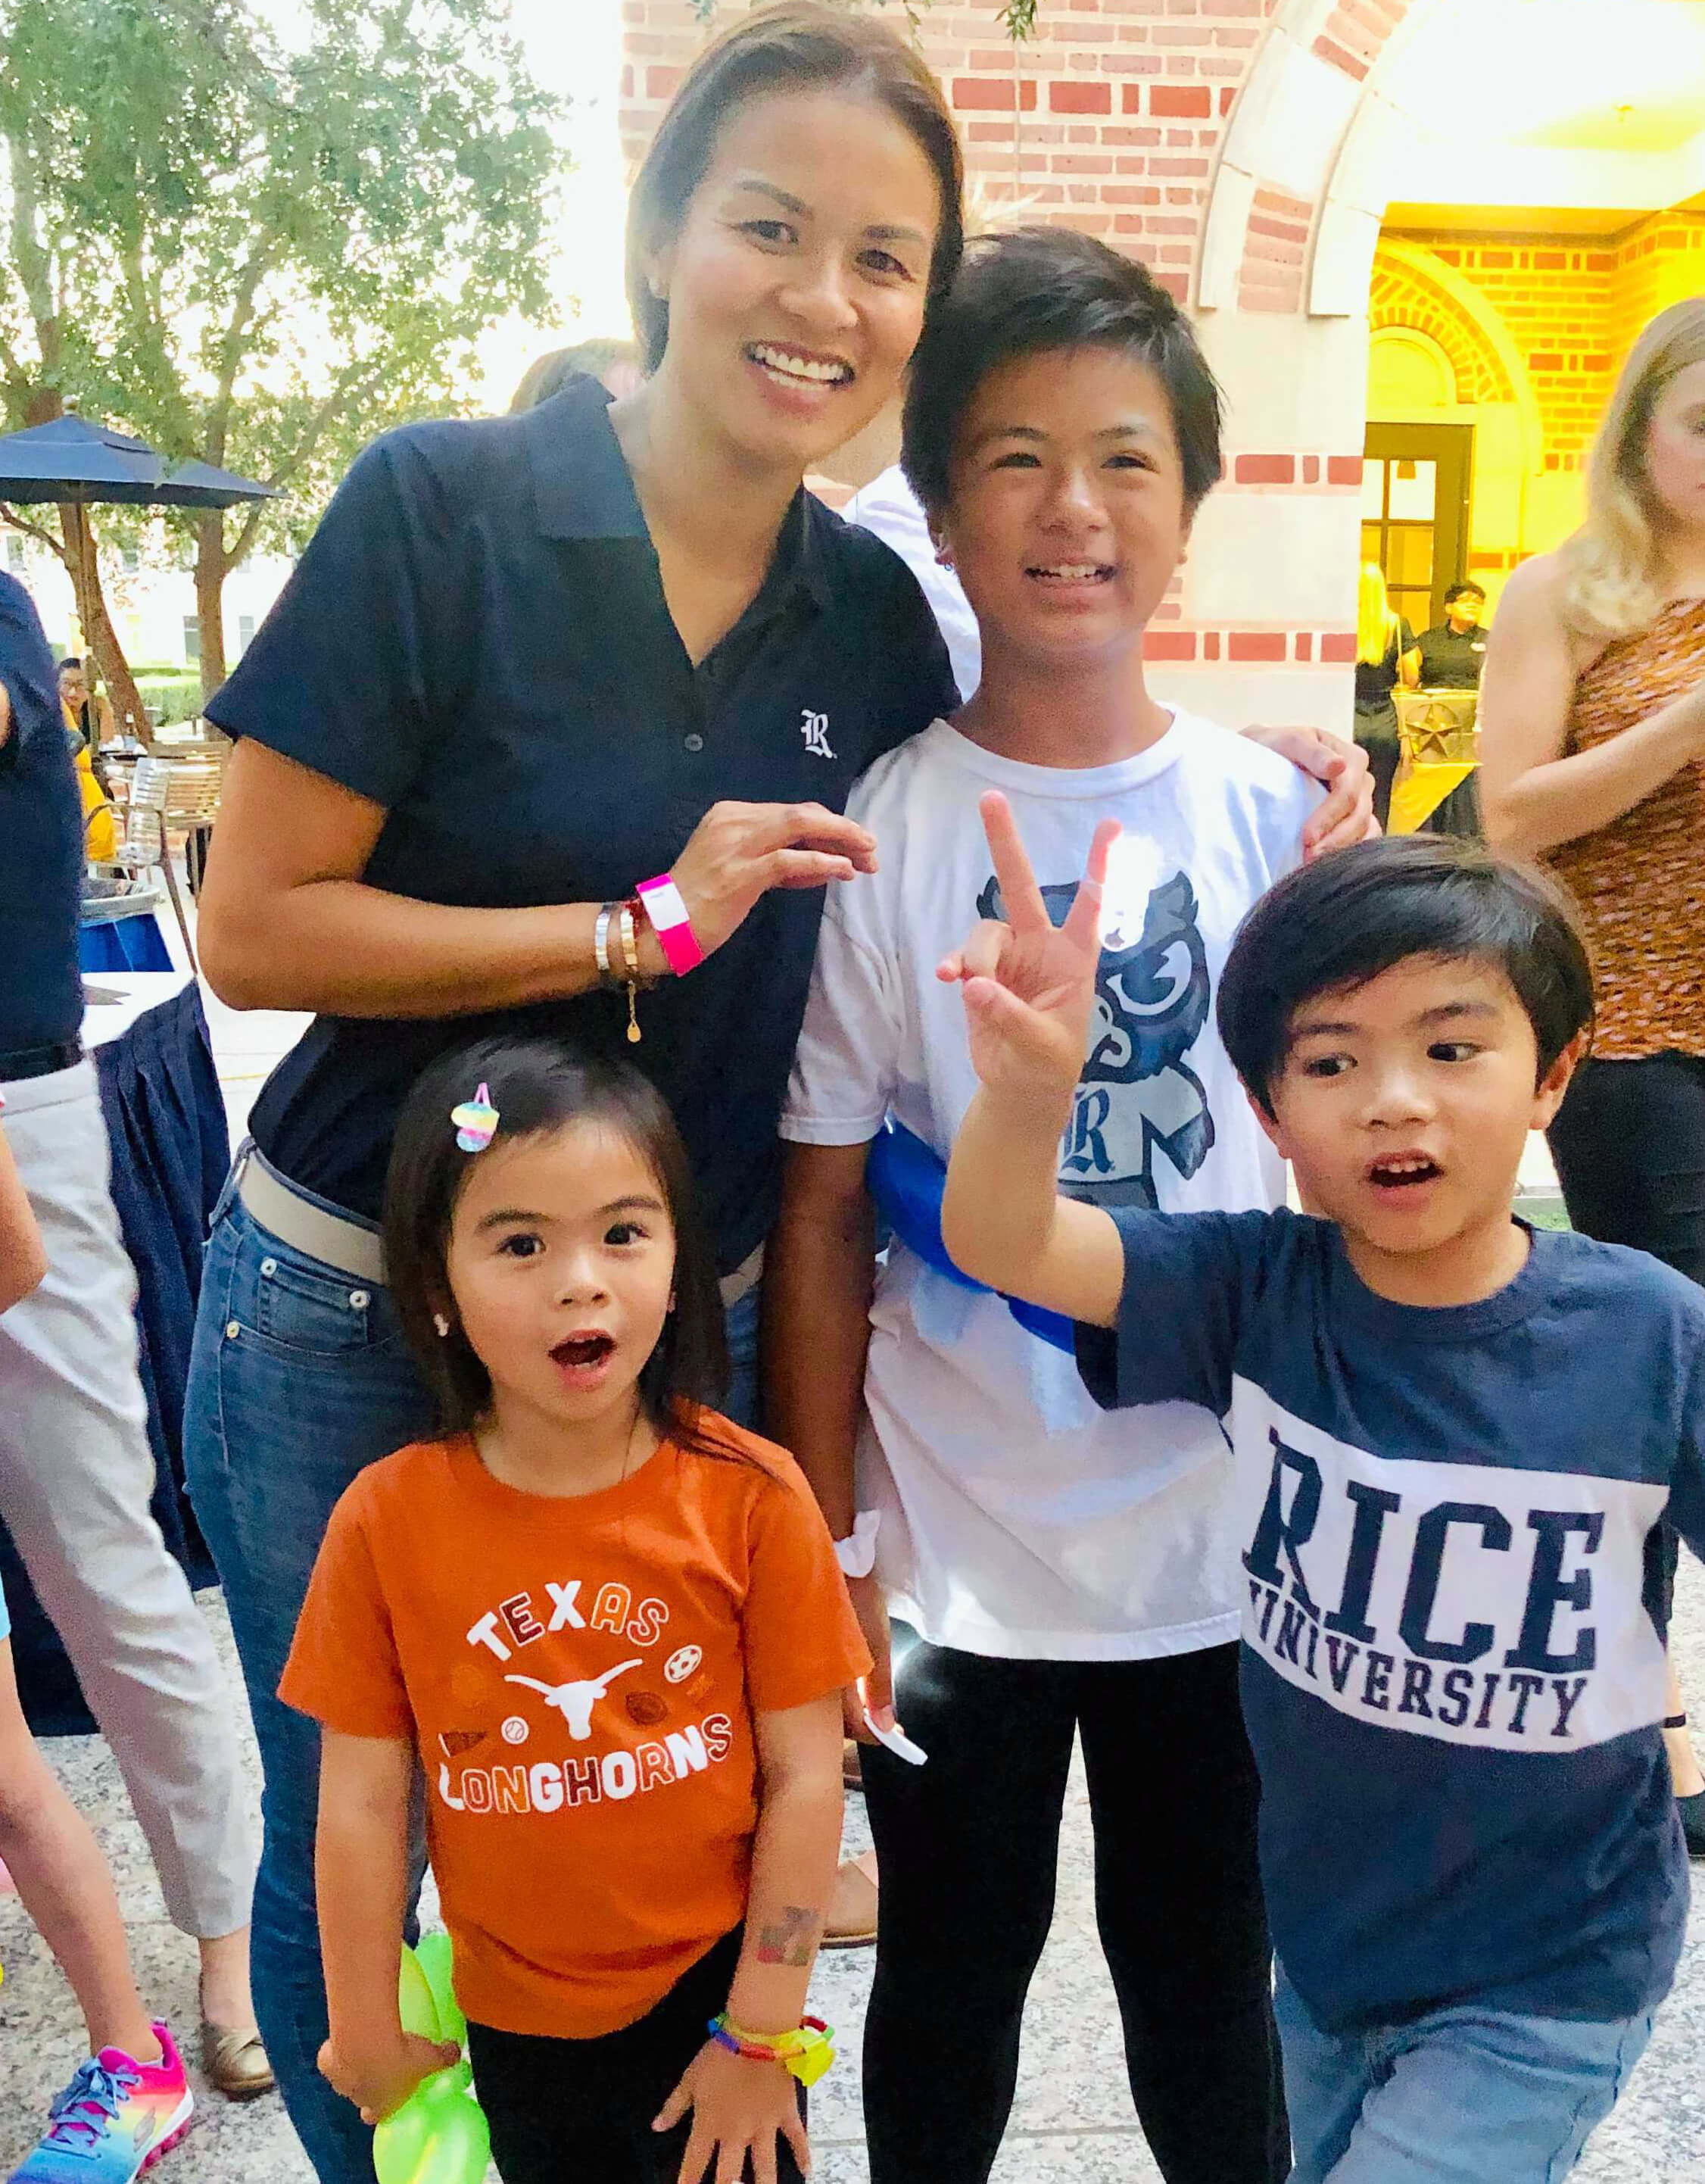 Jackie Nguyen and her children